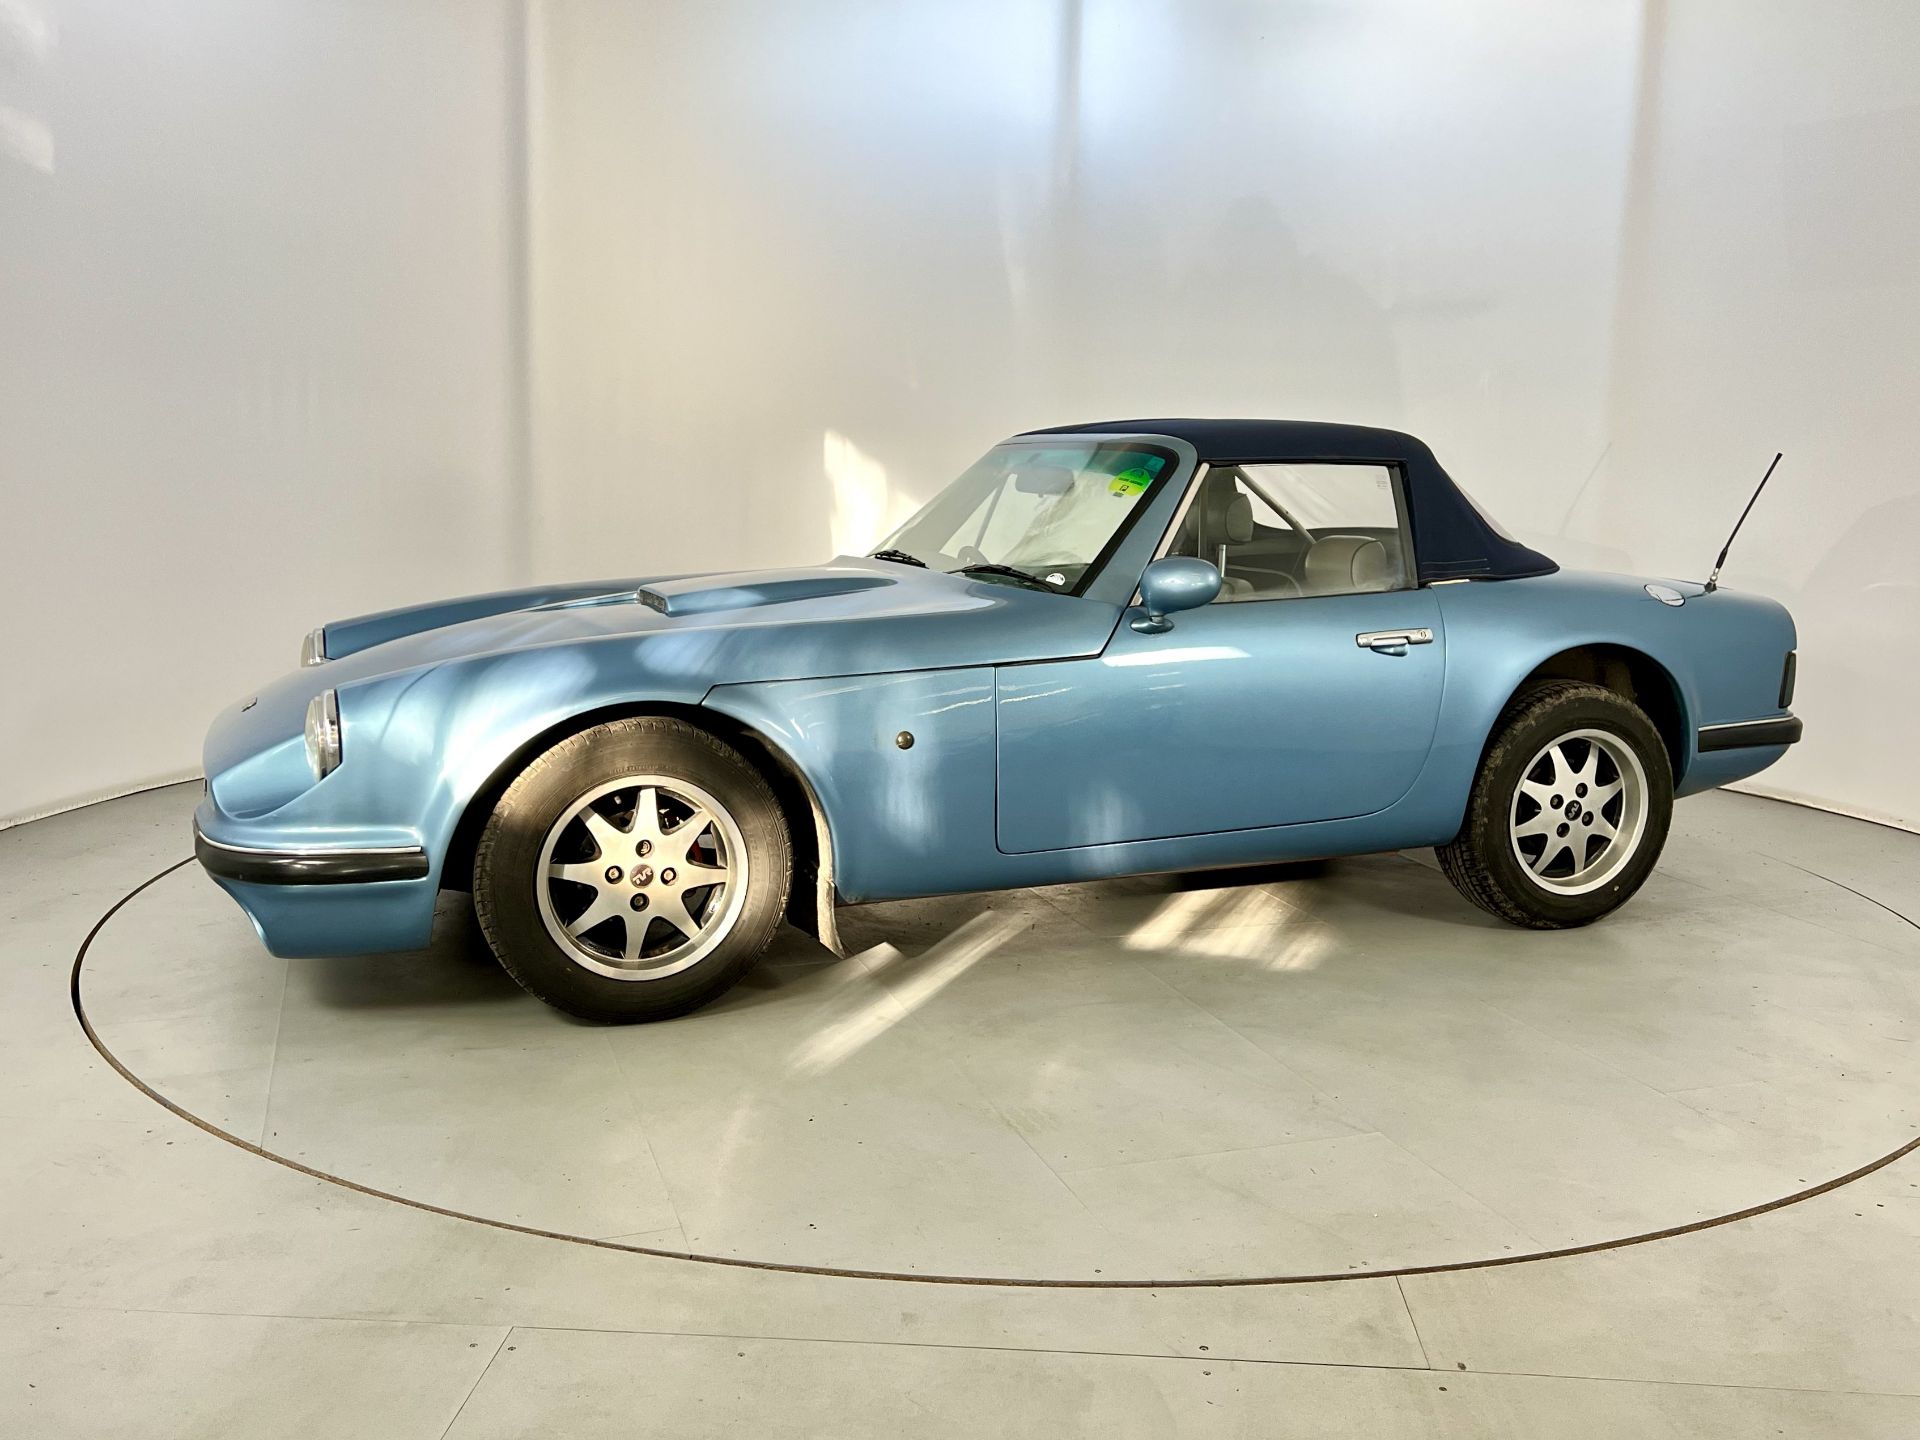 TVR S2 - Image 4 of 29